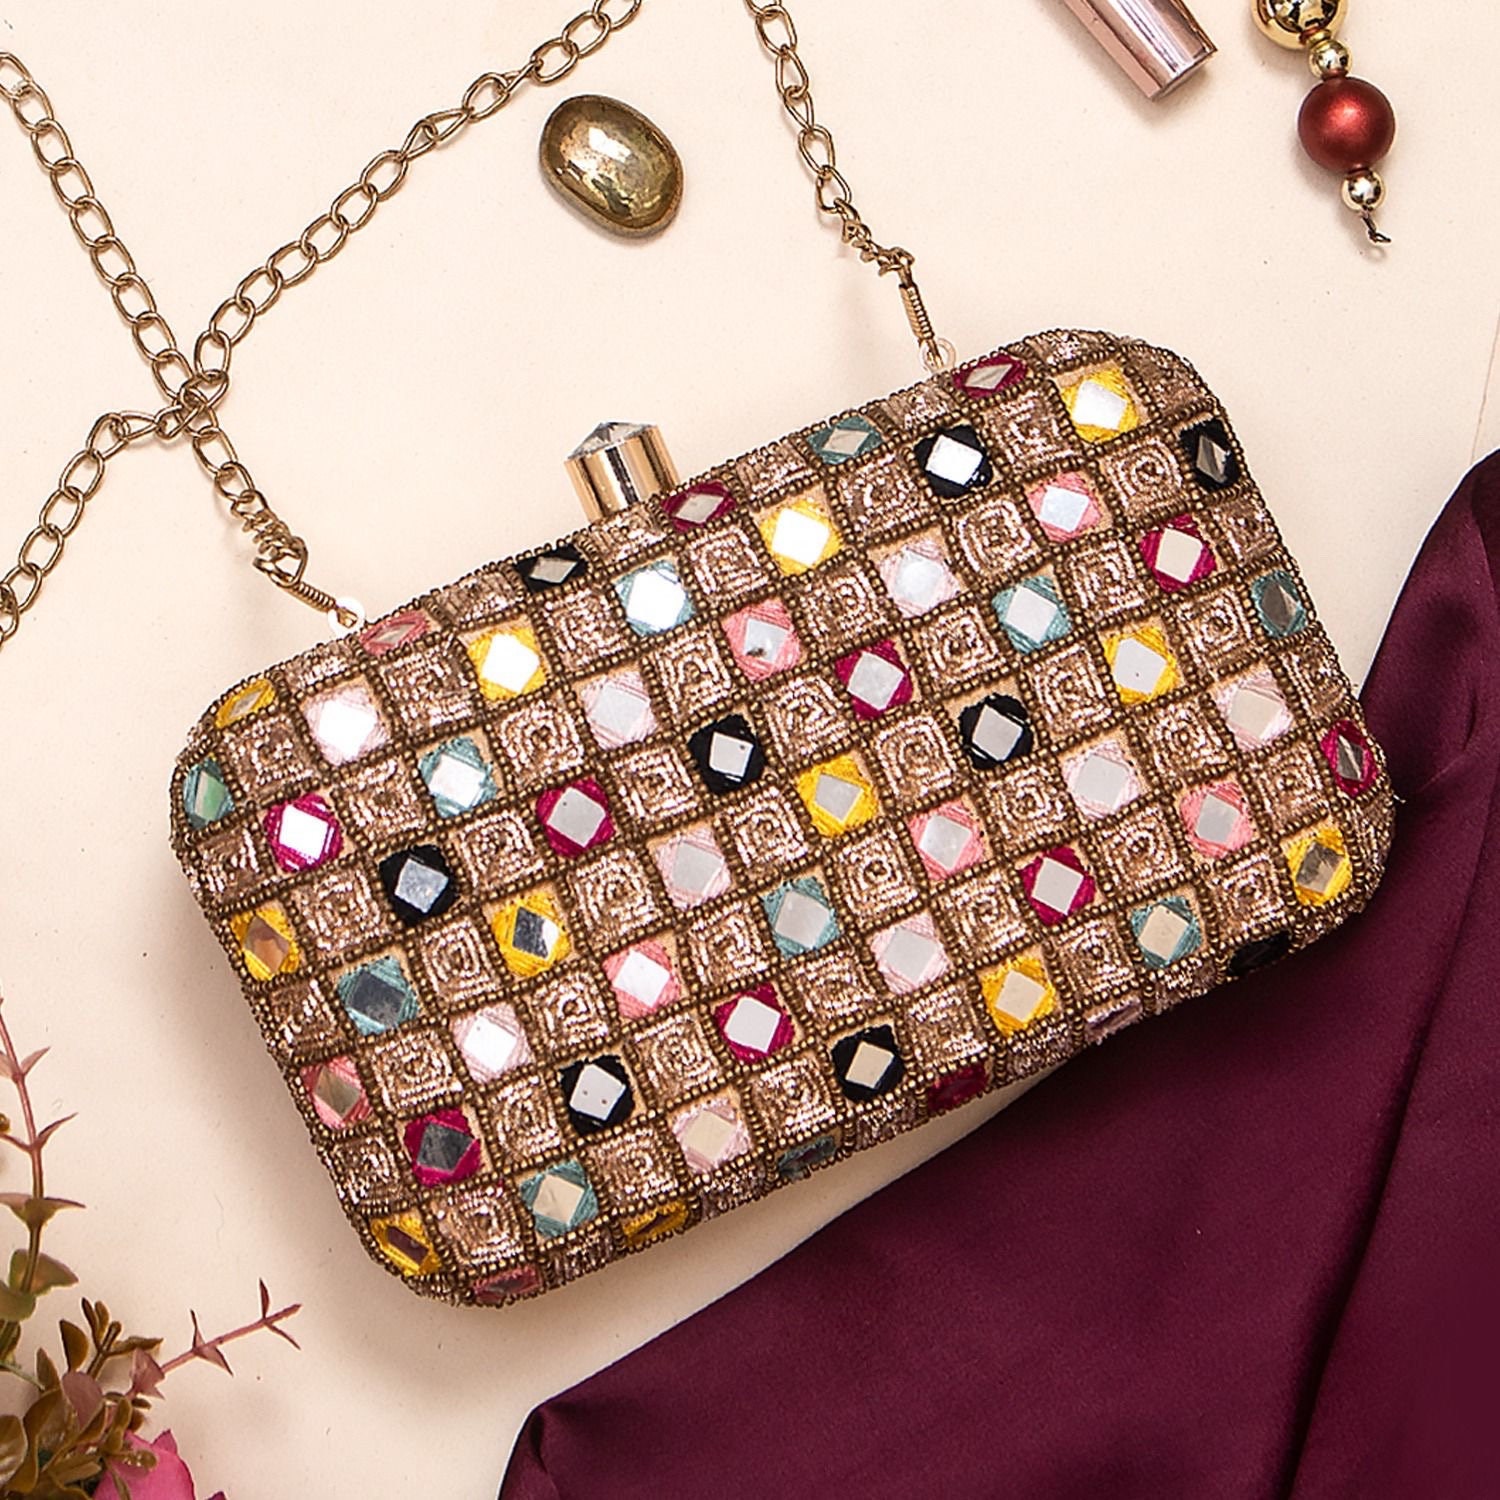 Evening Bag - Embroidery, Floral, Retro, Exquisite, Buy Now – Luxy Moon